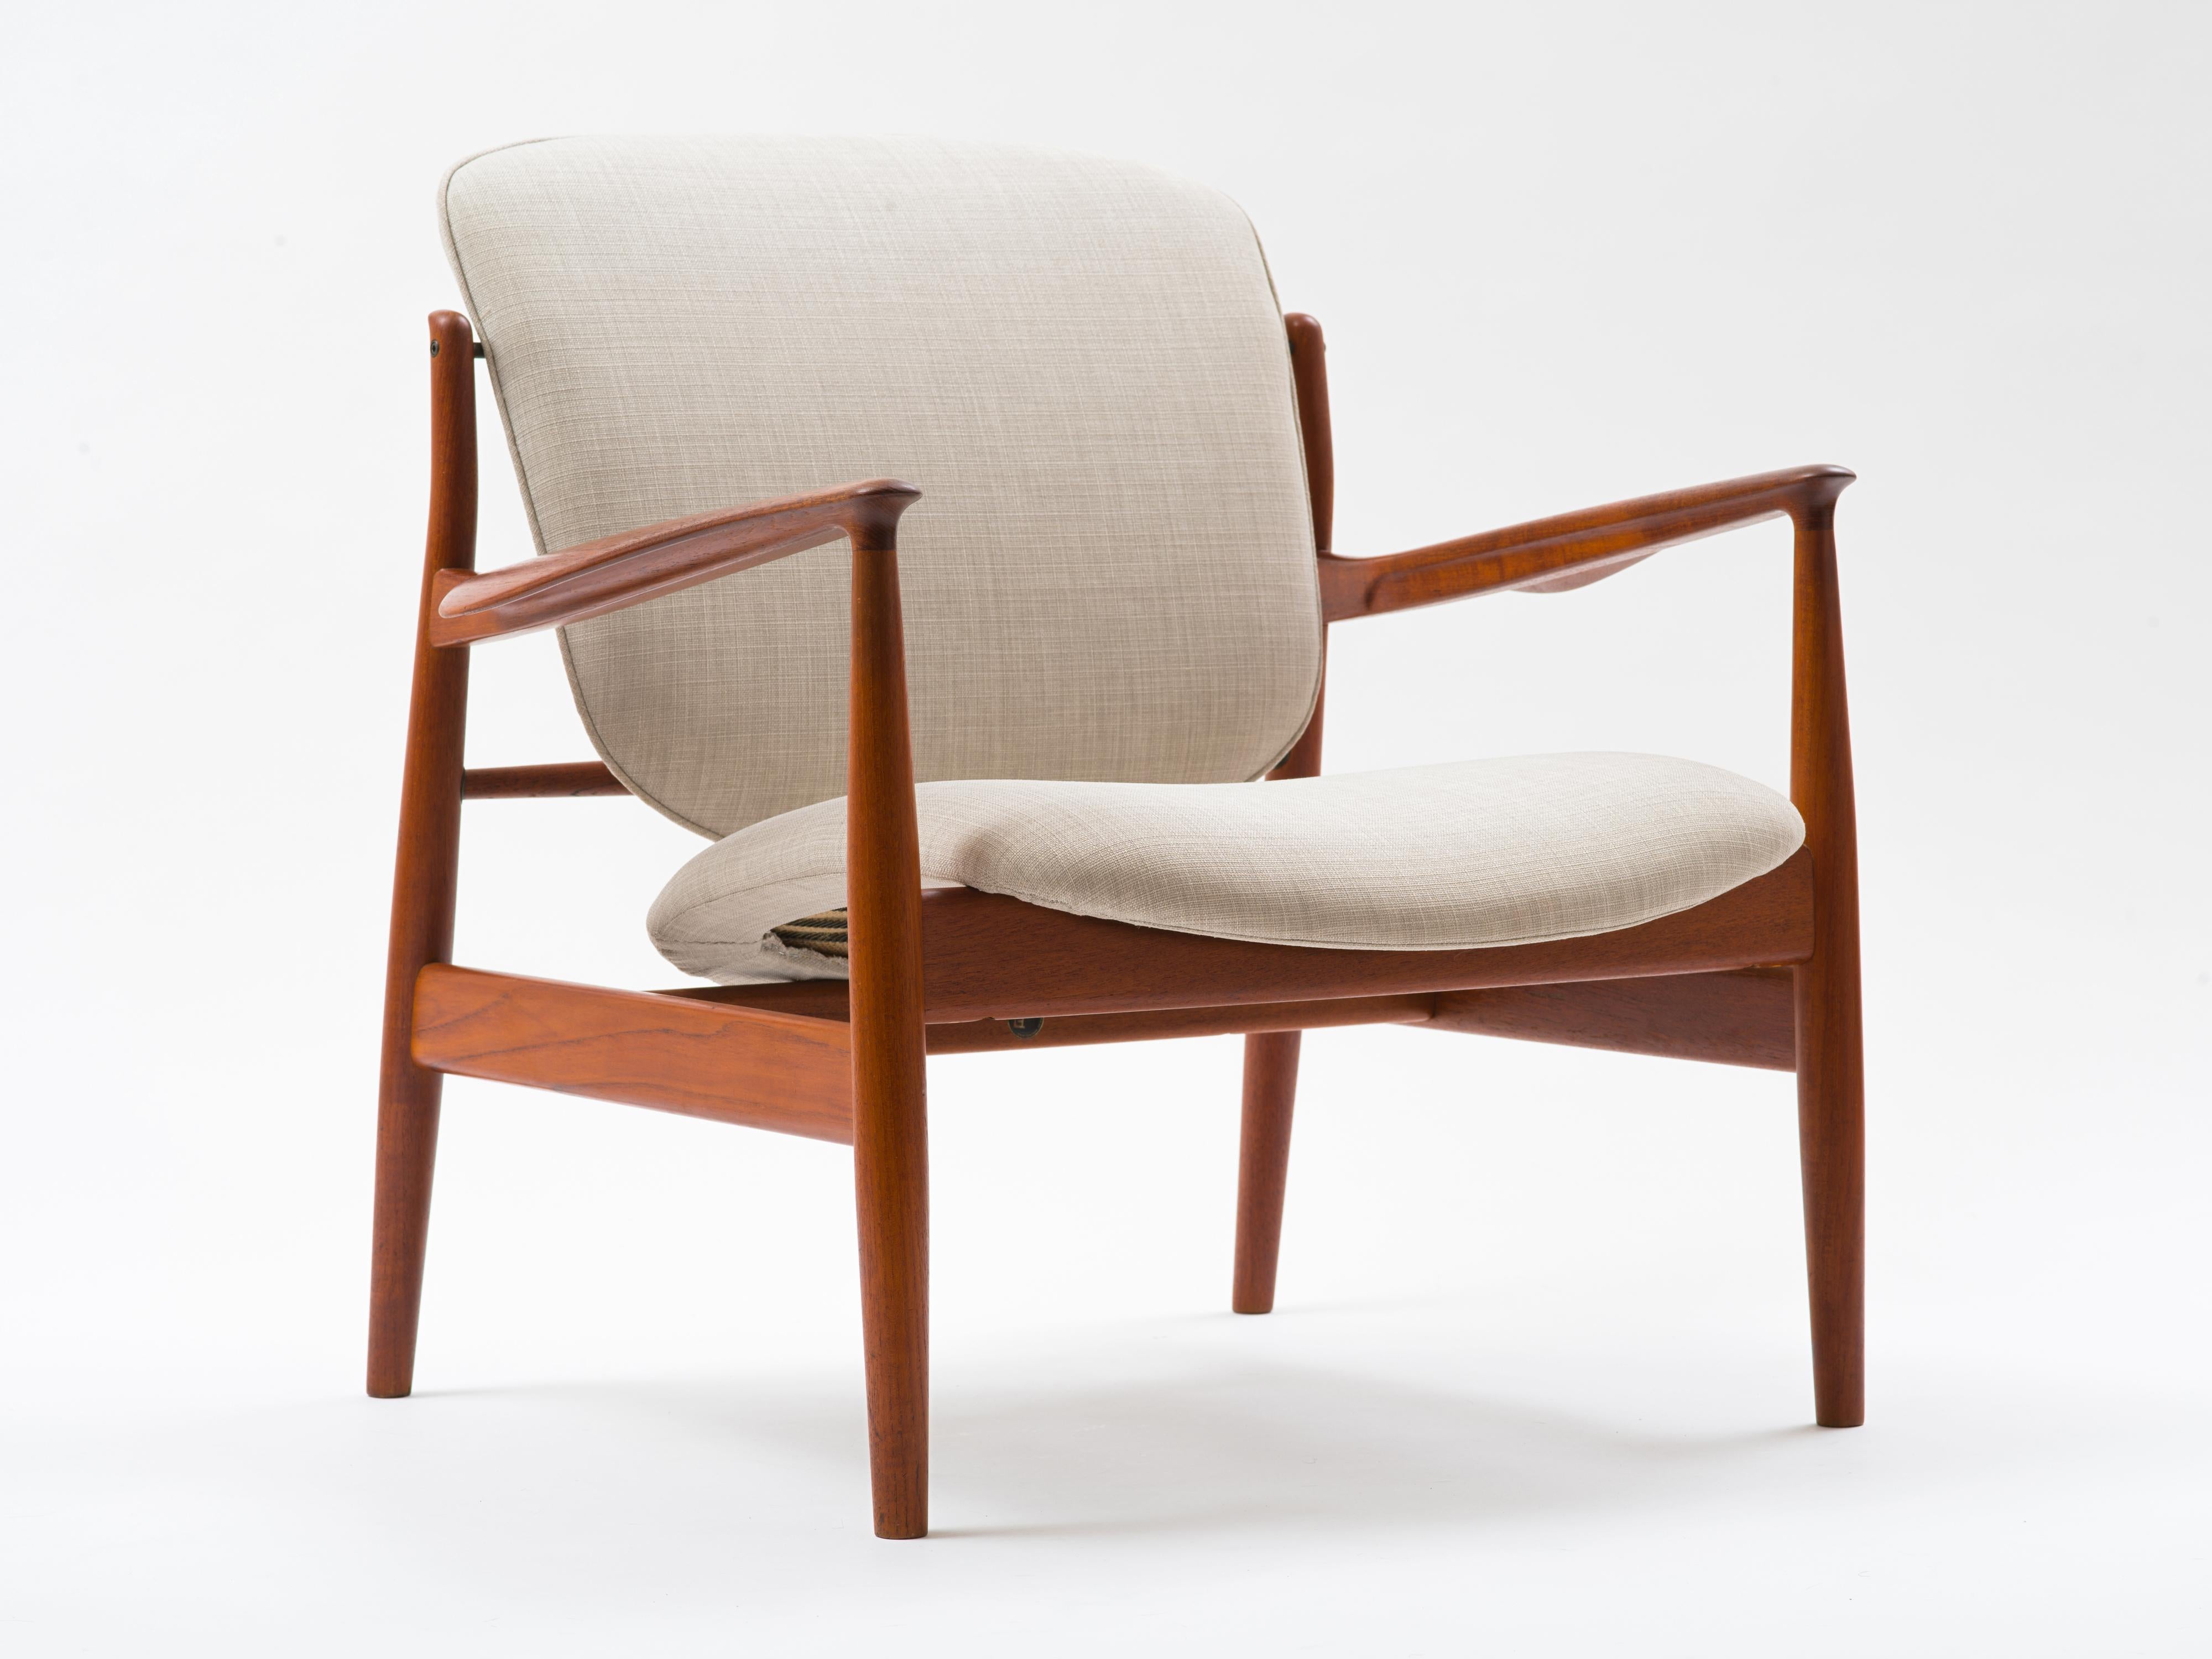 Lounge chair model number FD 136 designed by Finn Juhl for France & Son, Denmark, with a curved backrest and an undulating seat that float within a spare, elegant frame. This example belonged to a Danish expat who was a finish carpenter by trade and